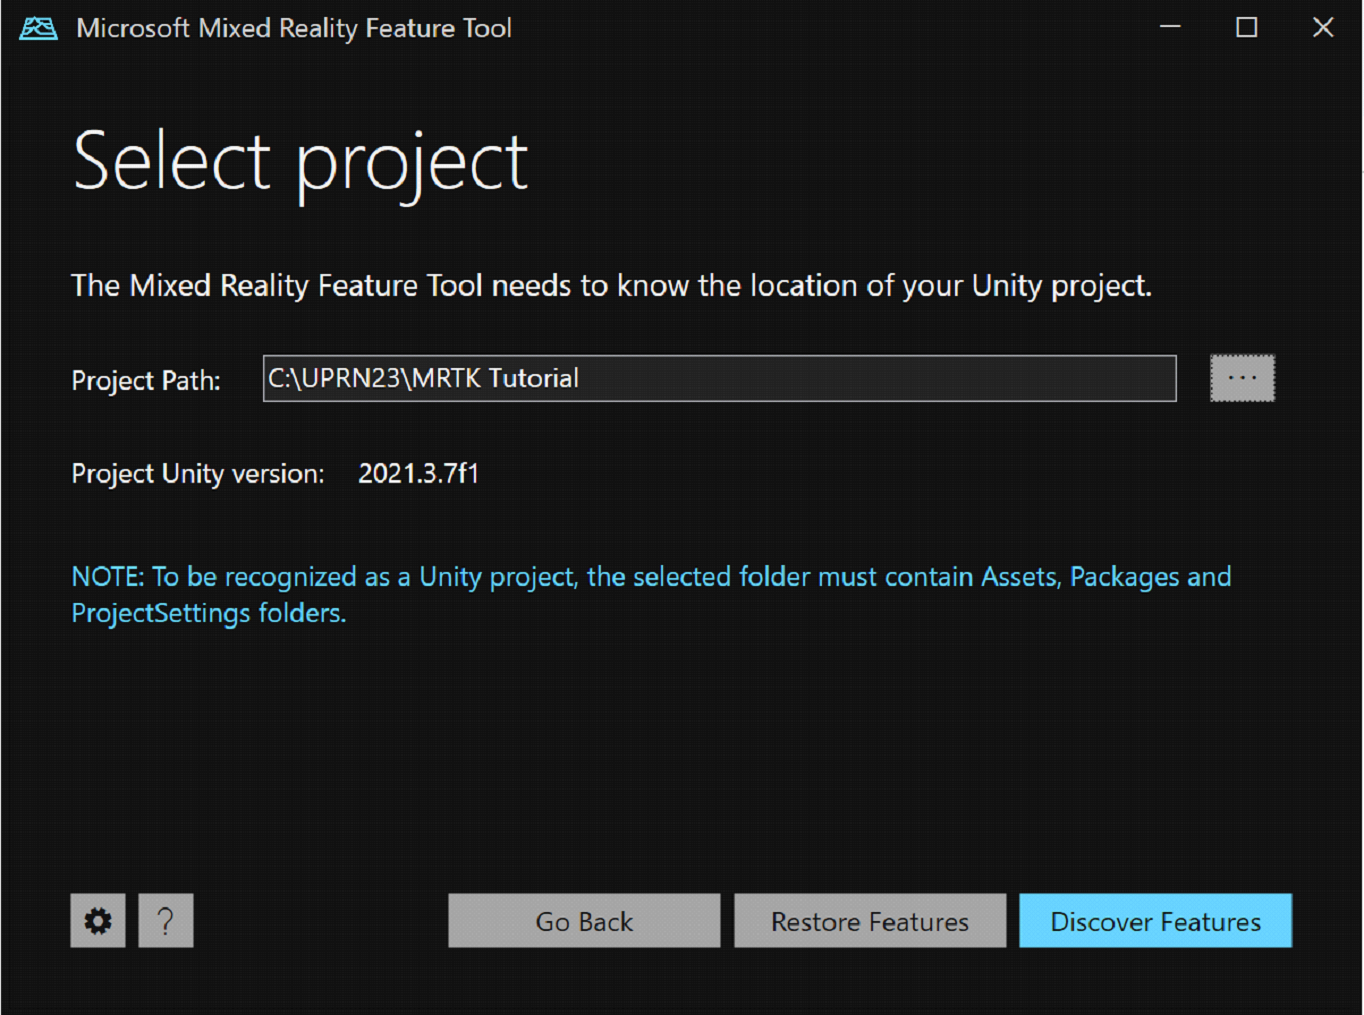 Screenshot of the Mixed Reality feature Tool Project Path screen.